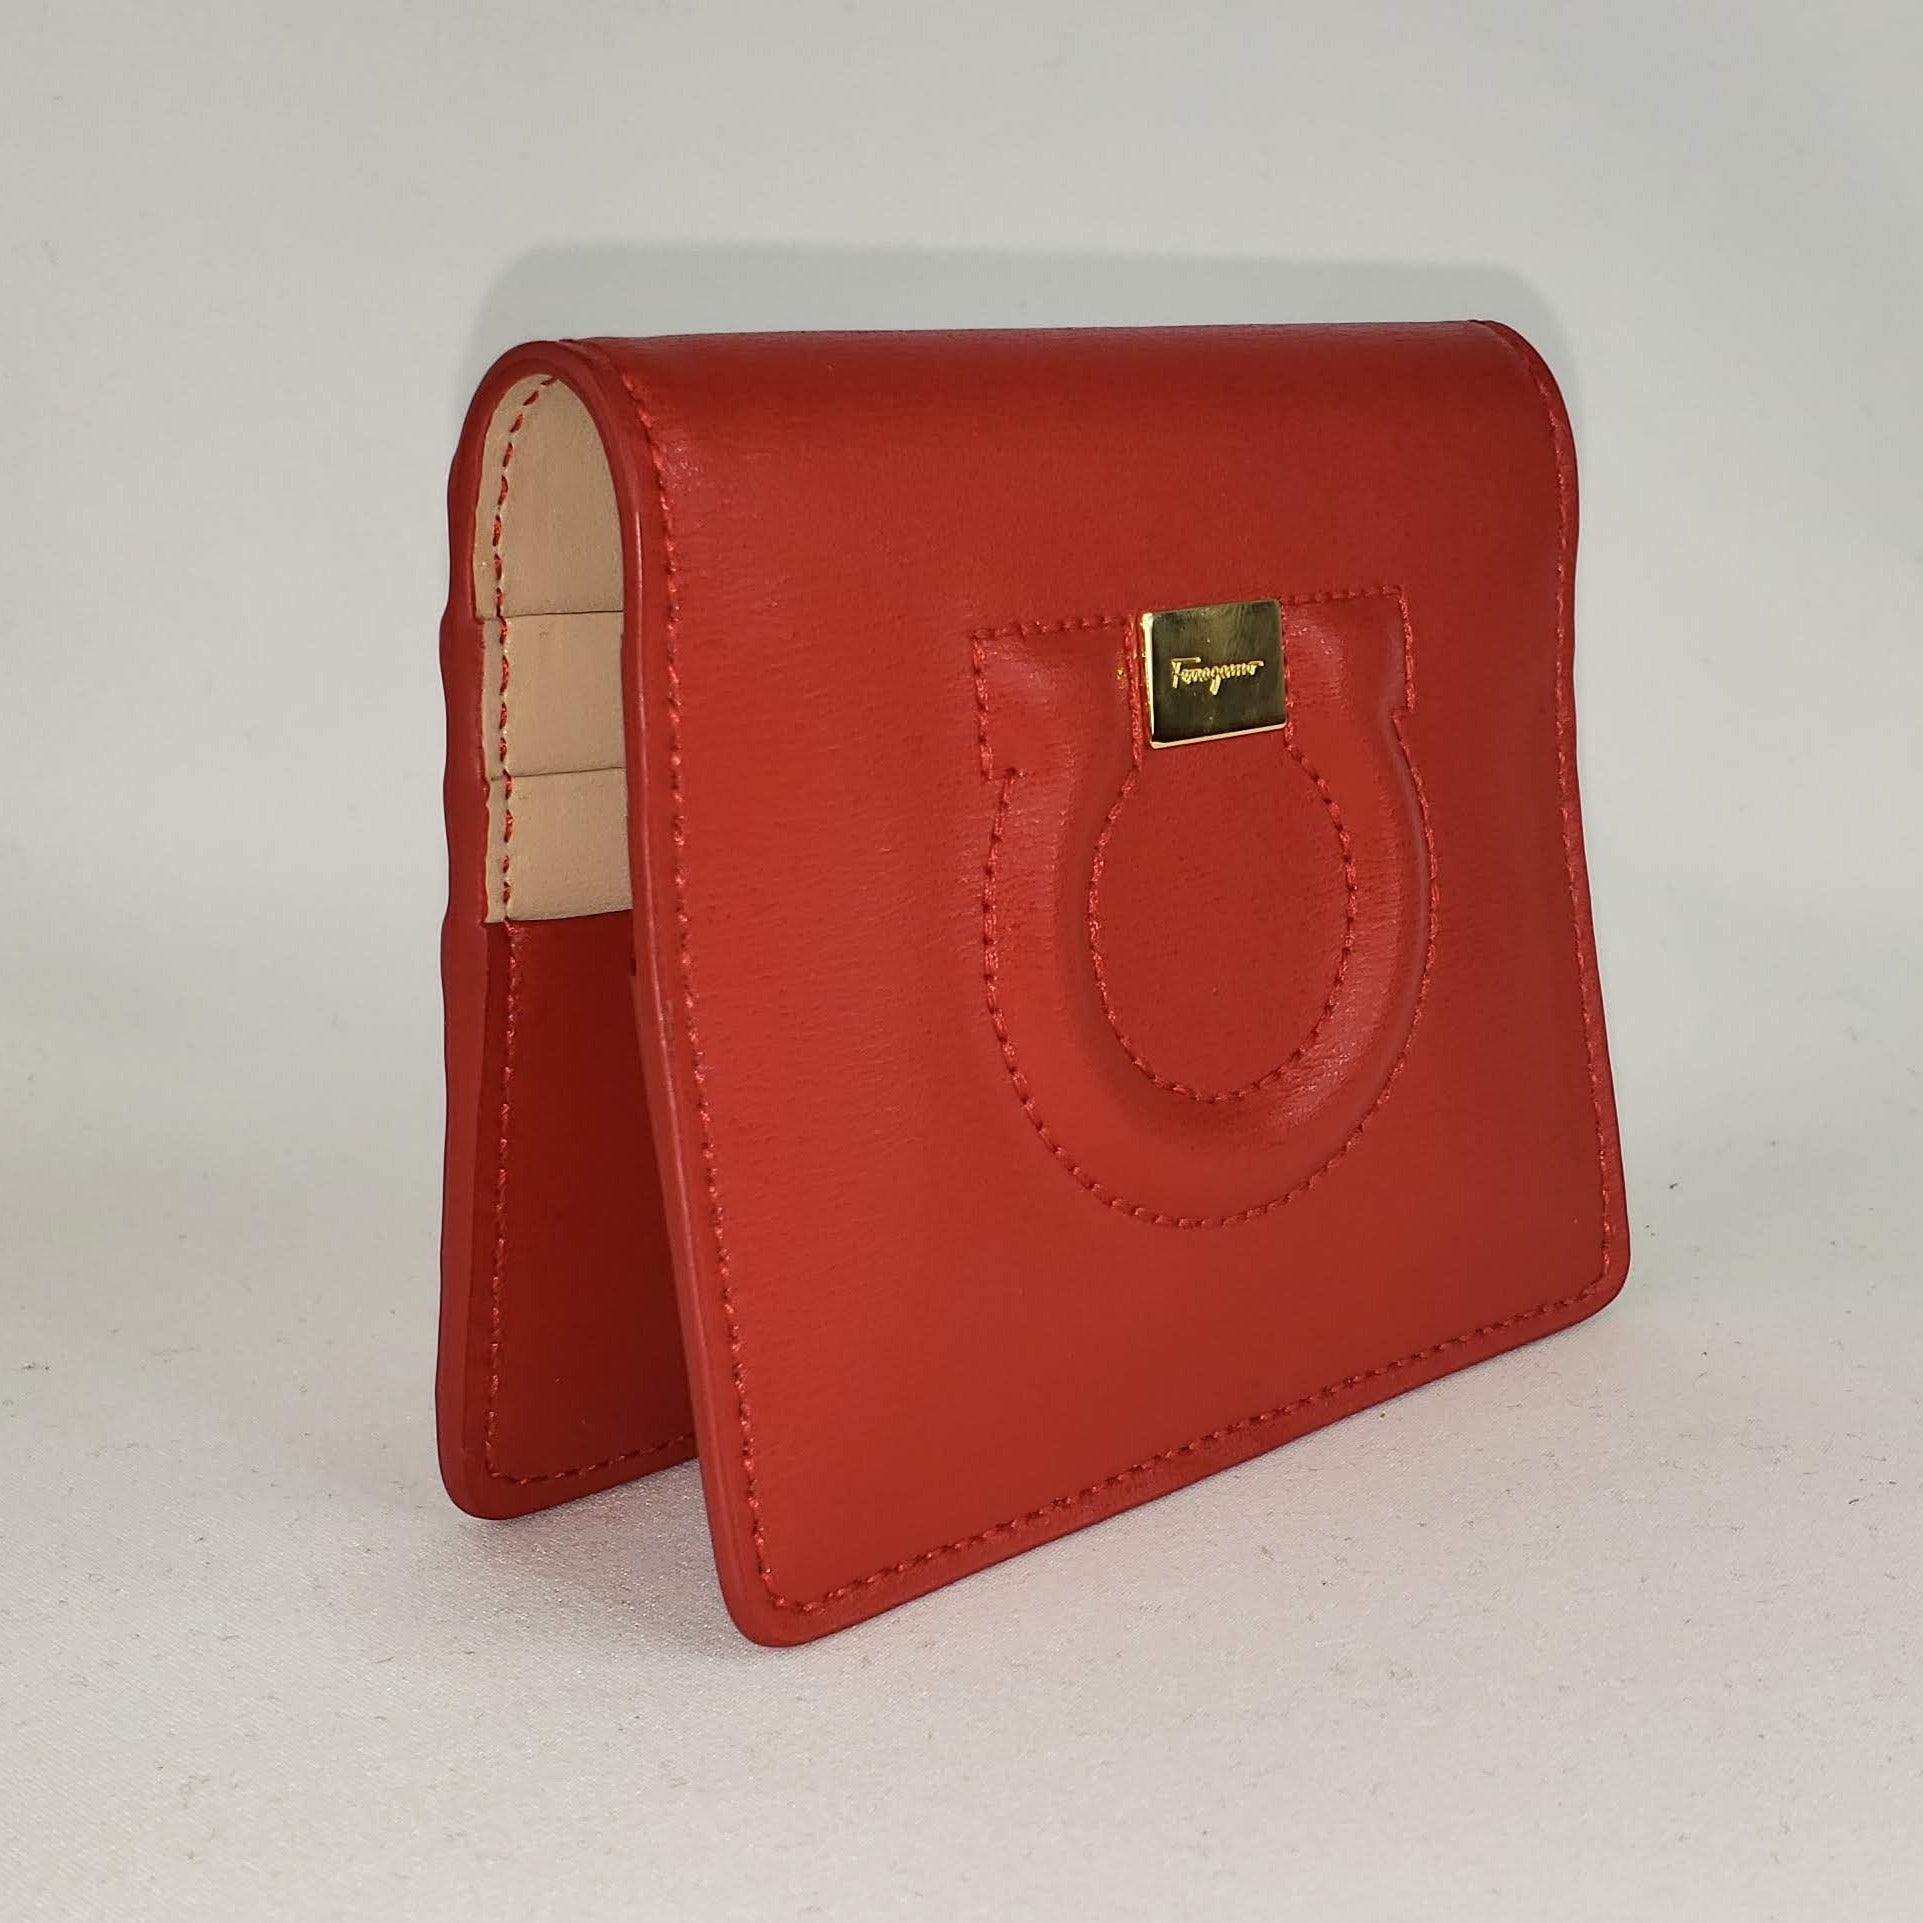 Gancini compact wallet, red, Wallets & Coin Purses Women's